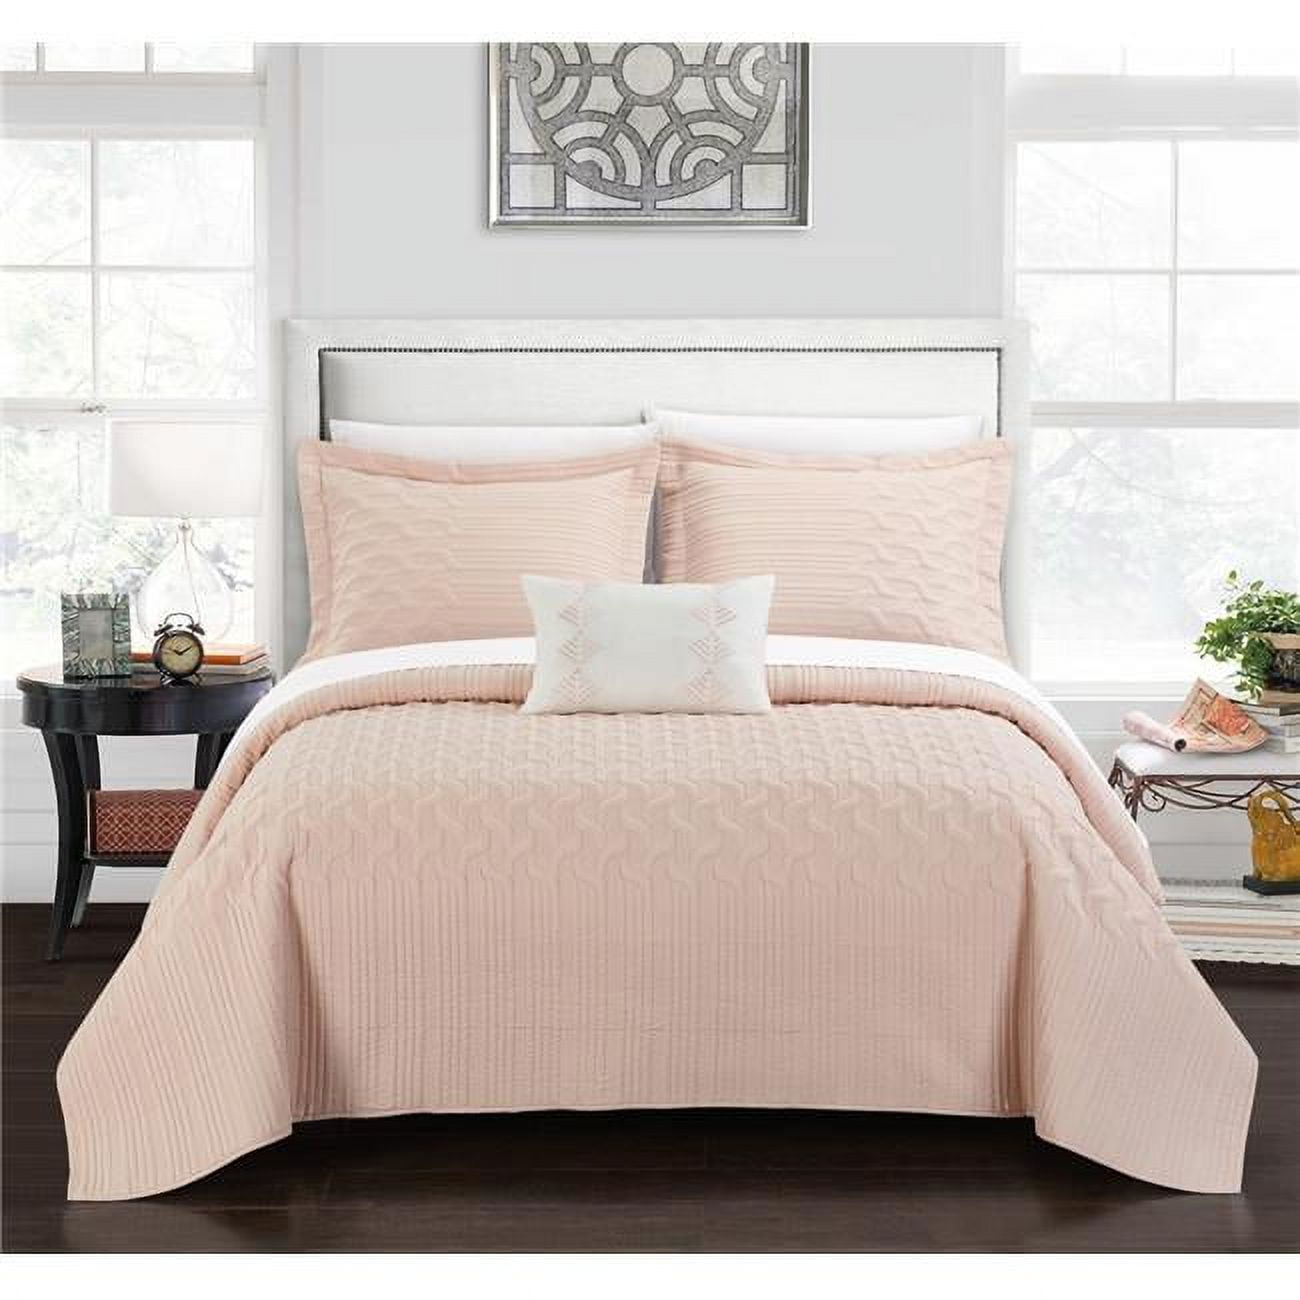 Bqs10513-bib-us King Size Shaela Interlaced Vine Pattern Quilted Bed In A Bag Cover Sheet Set, Blush - 8 Piece